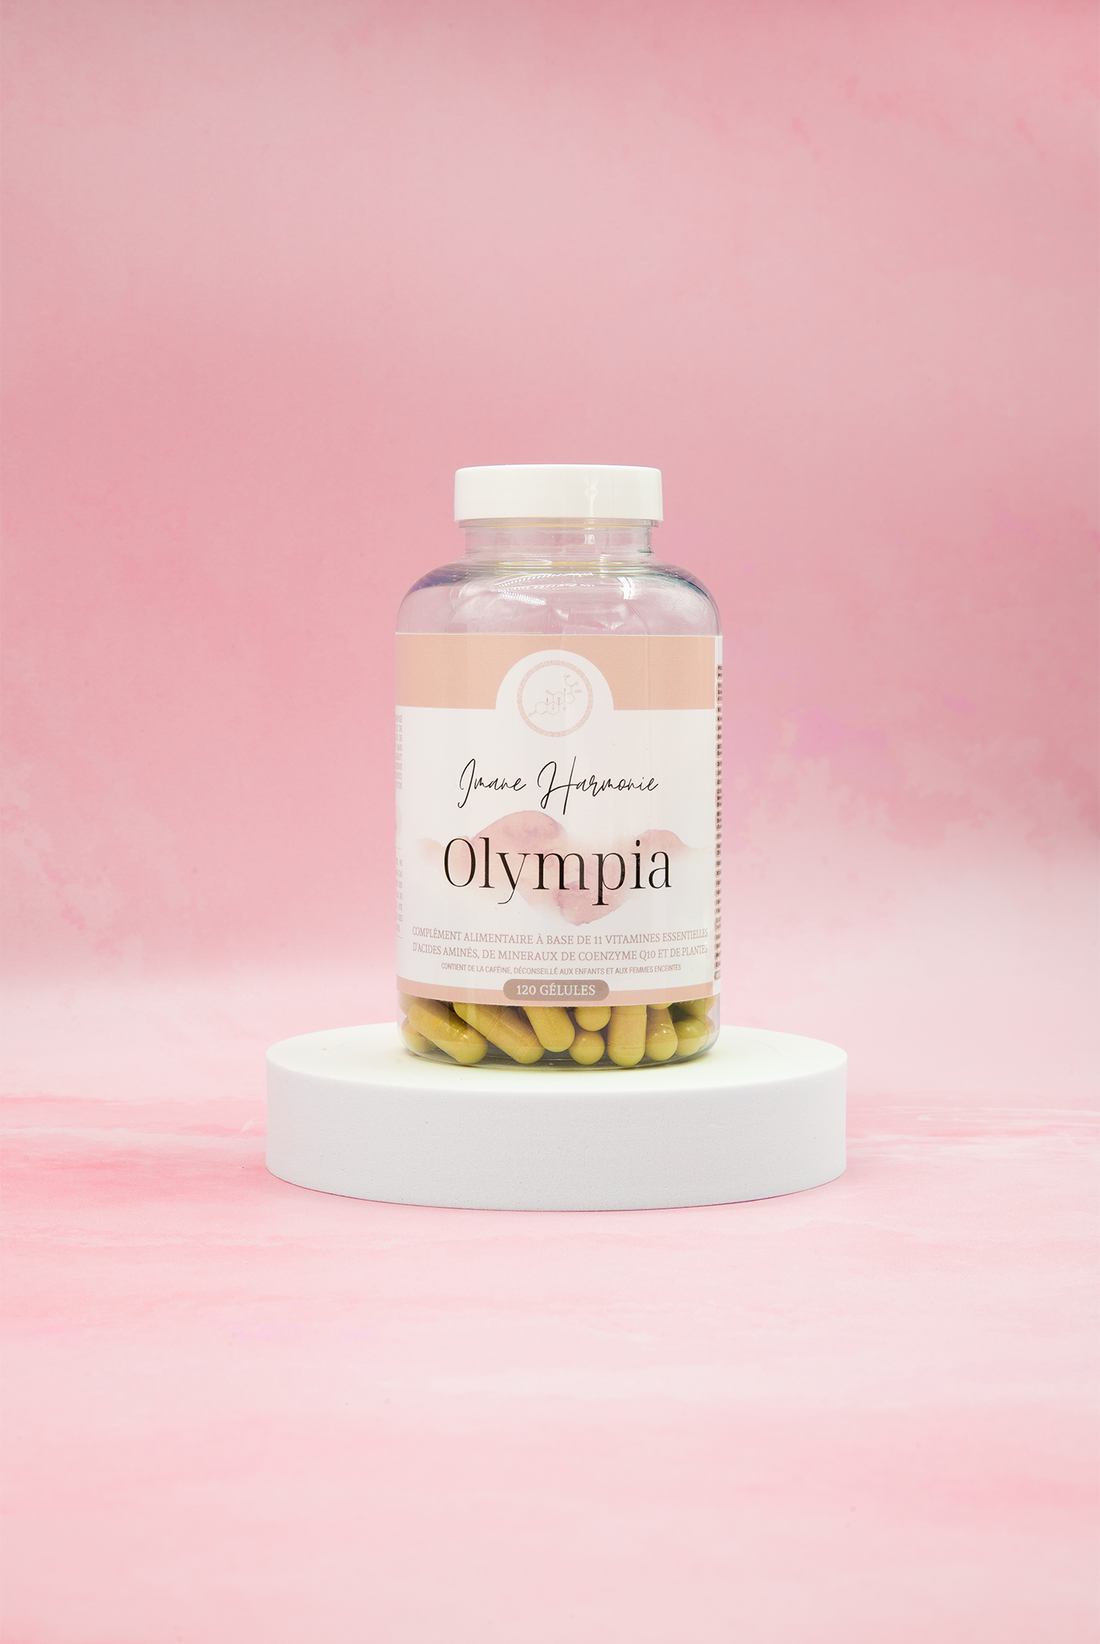 Olympia is uniquely crafted to support women&